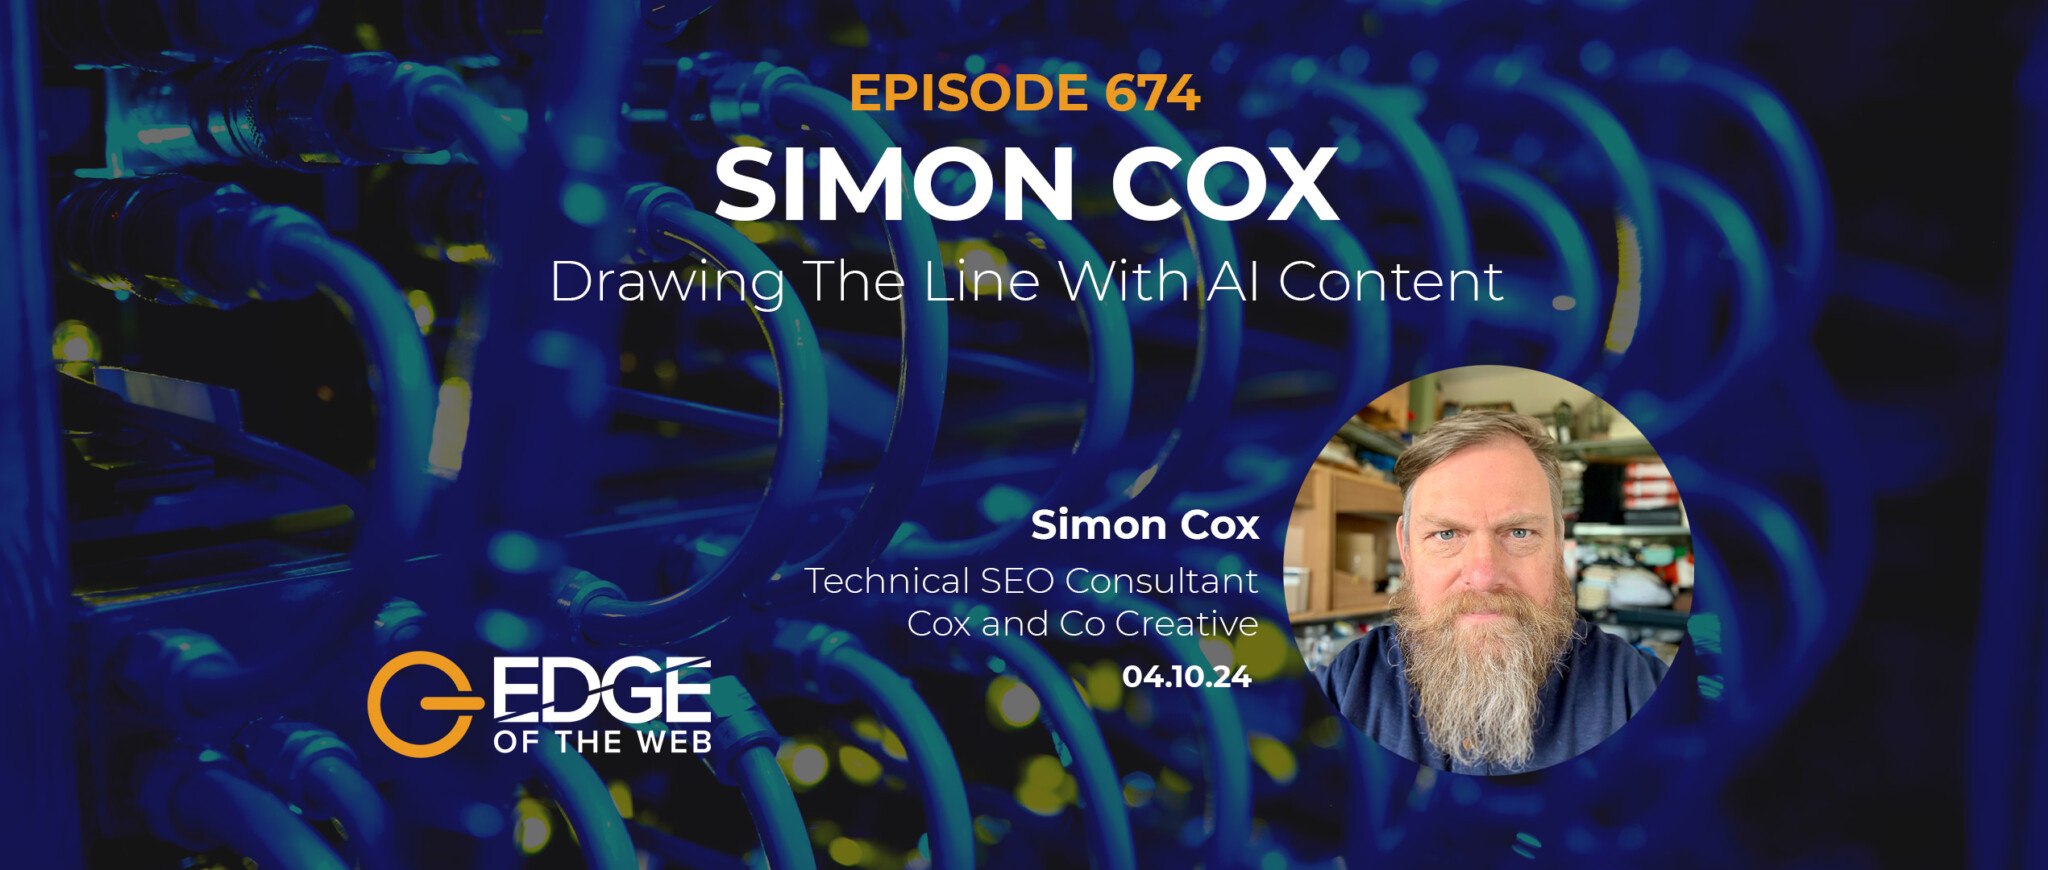 Episode 674: Drawing The Line With AI Content with Simon Cox